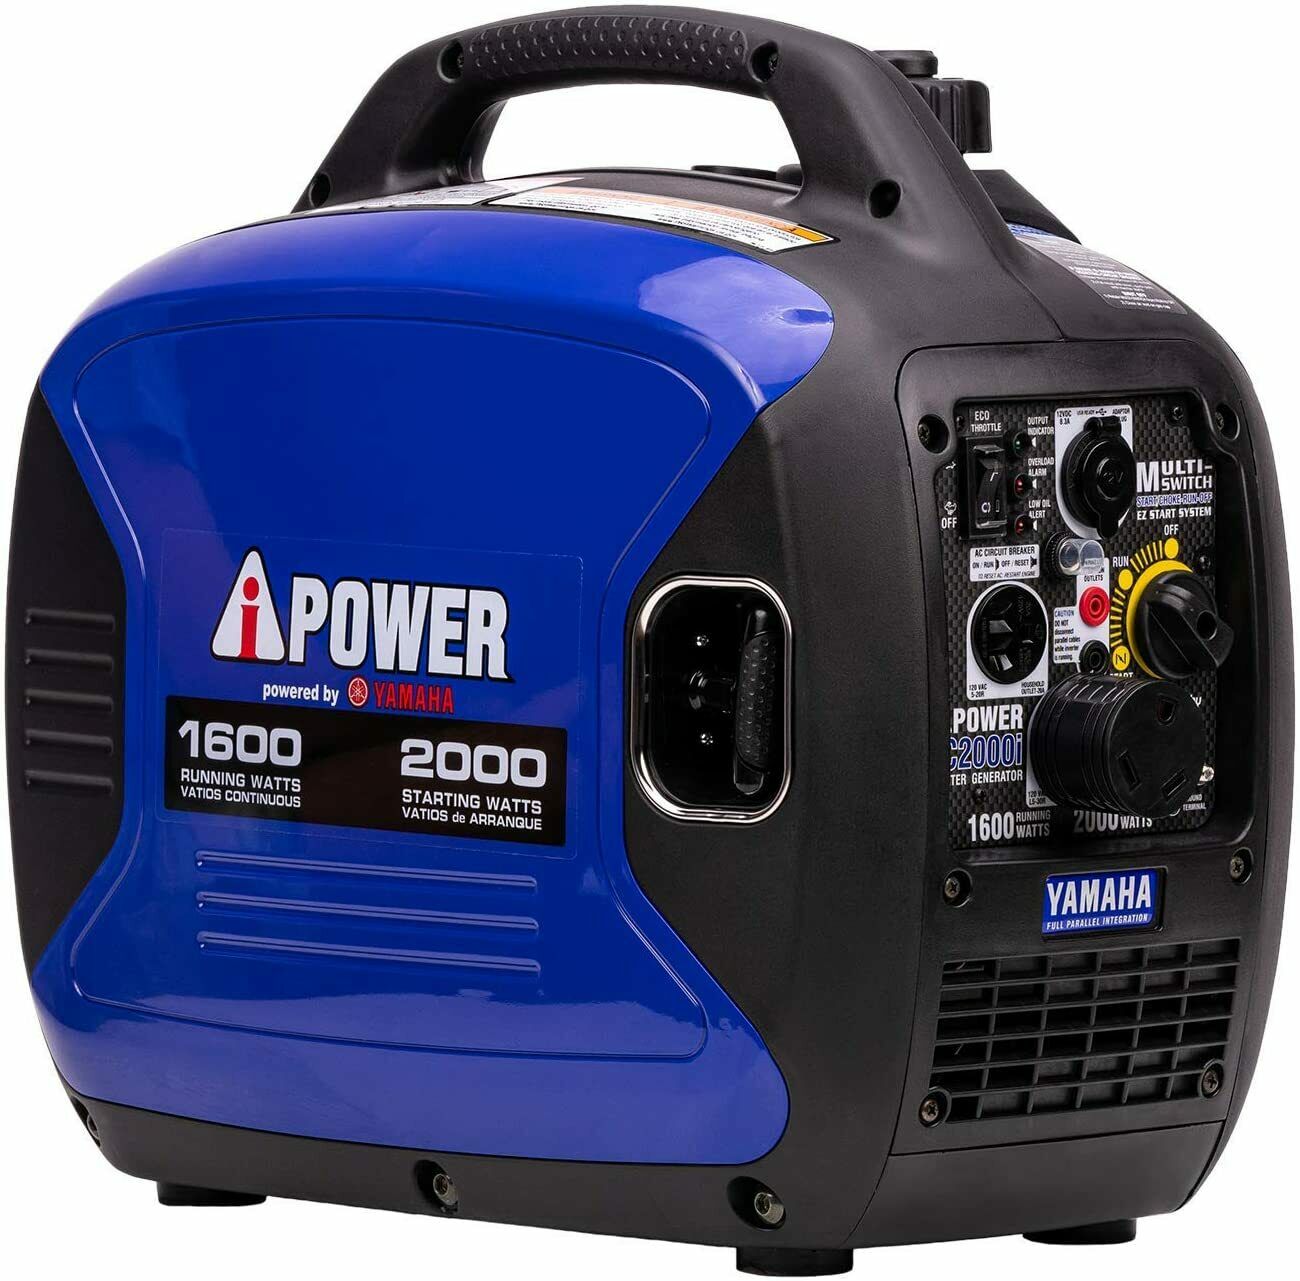 Top Features Of The Yamaha Generator 2000